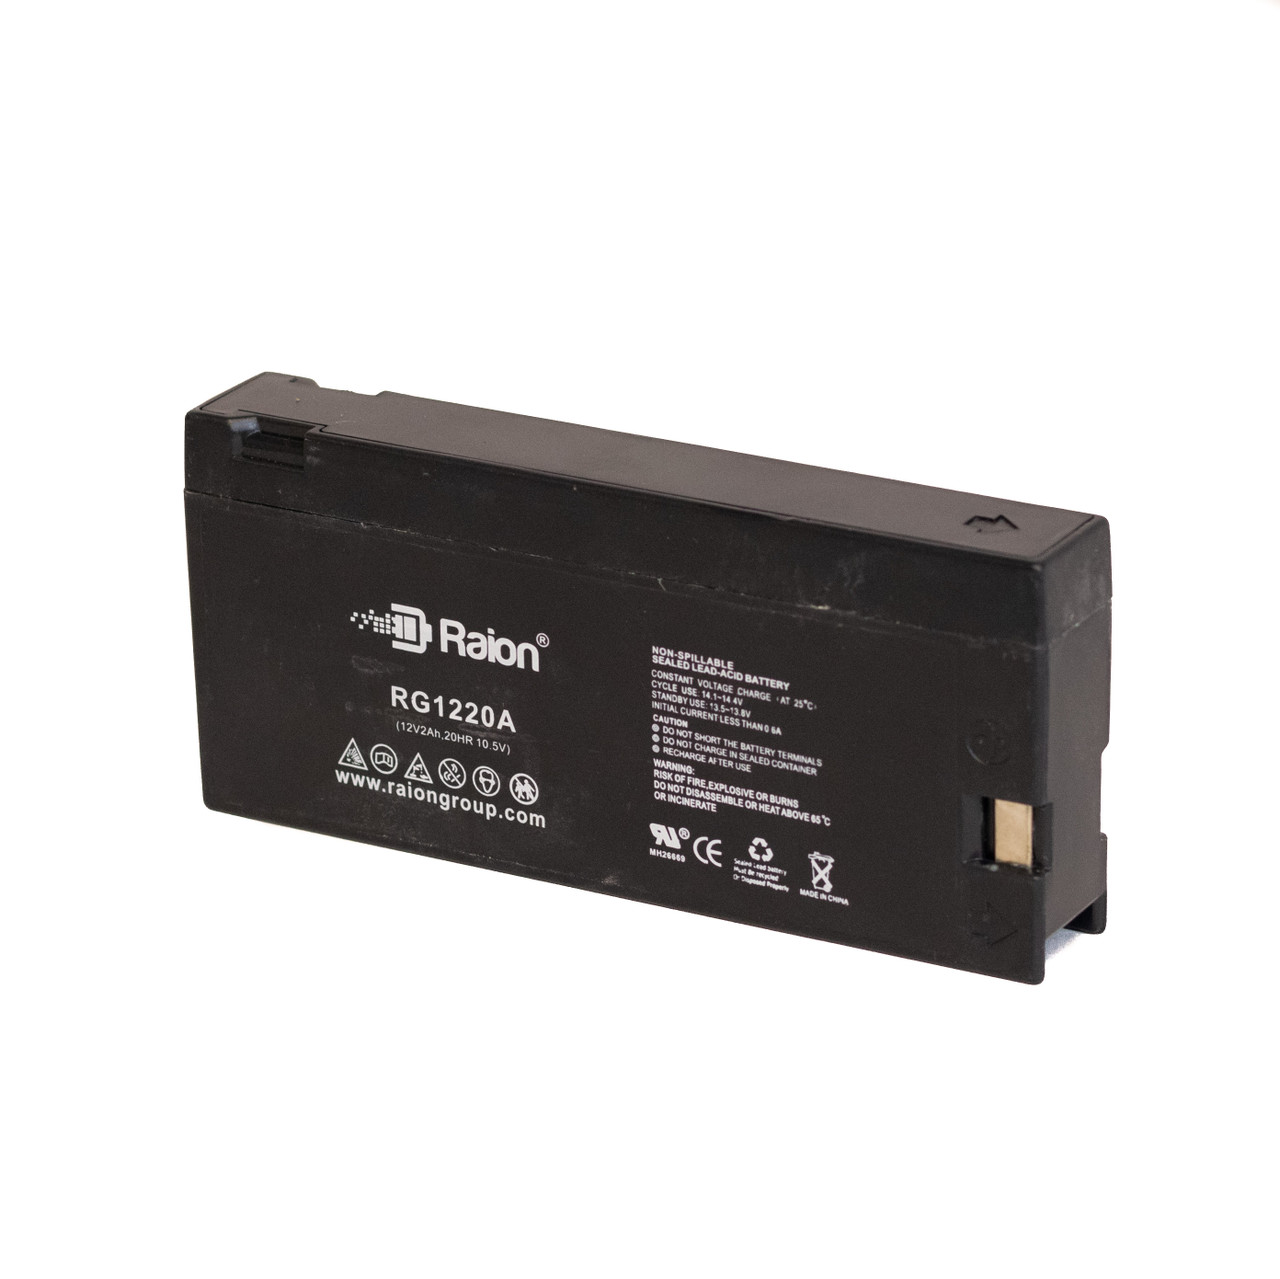 Raion Power RG1220A Replacement Battery for General Electric CG-895